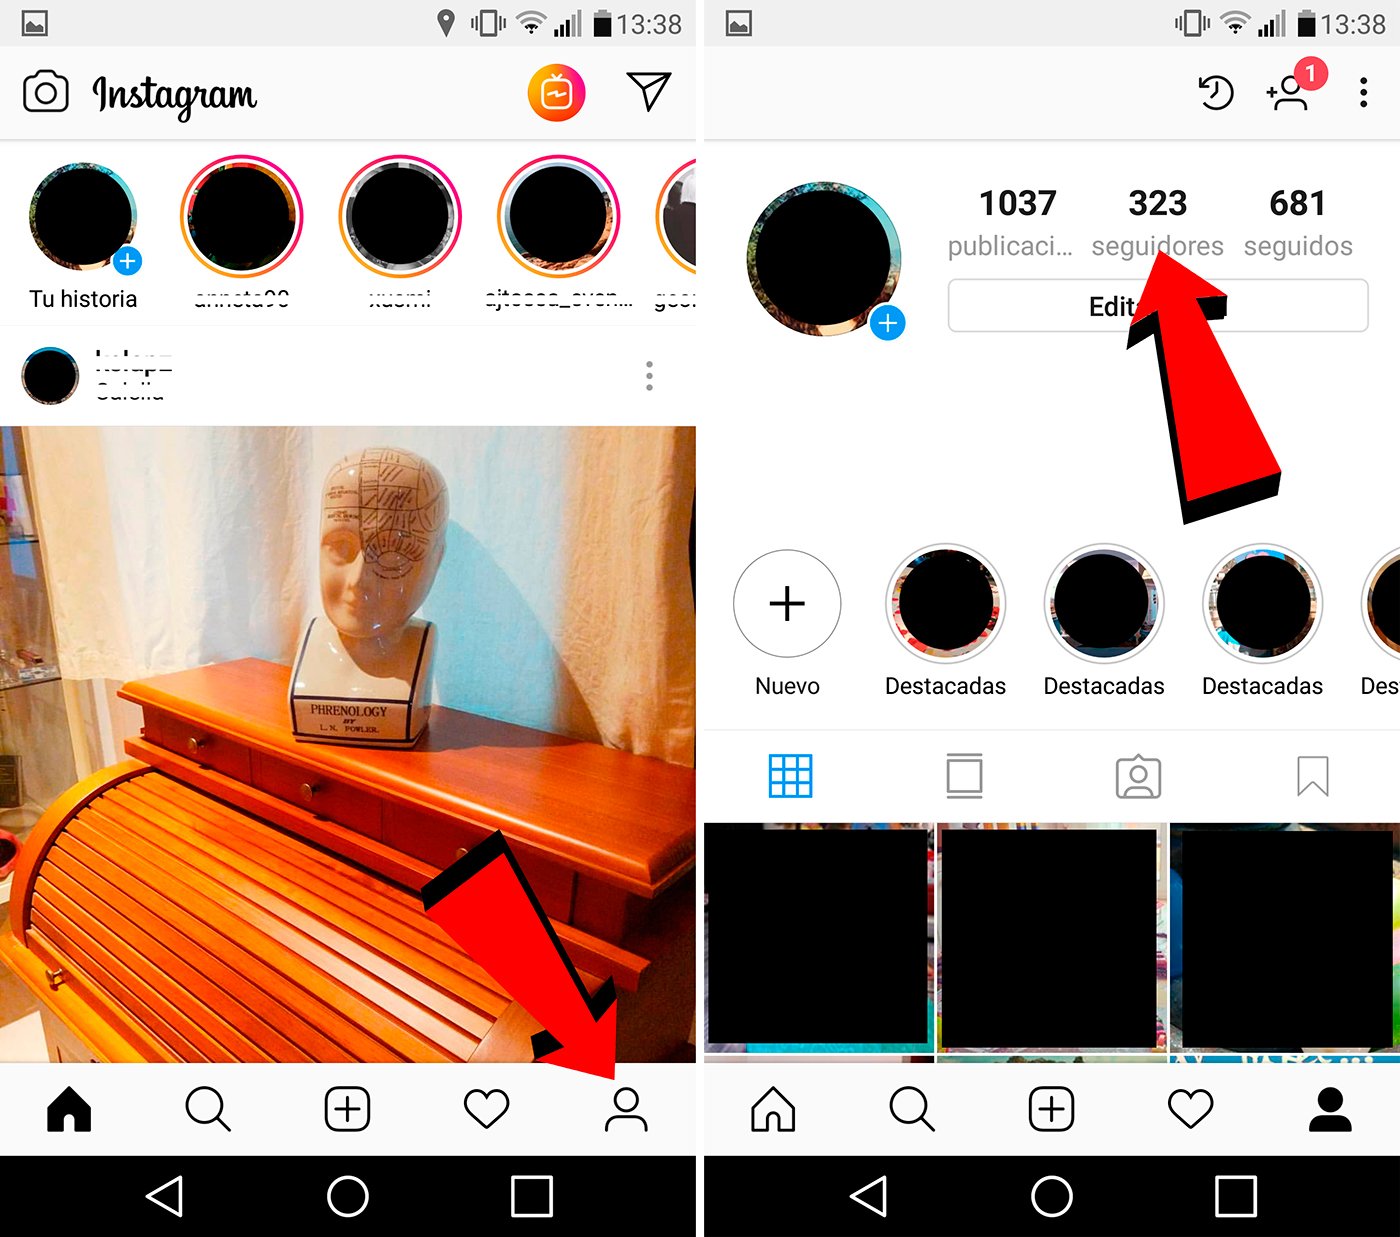 How to delete followers from our Instagram account